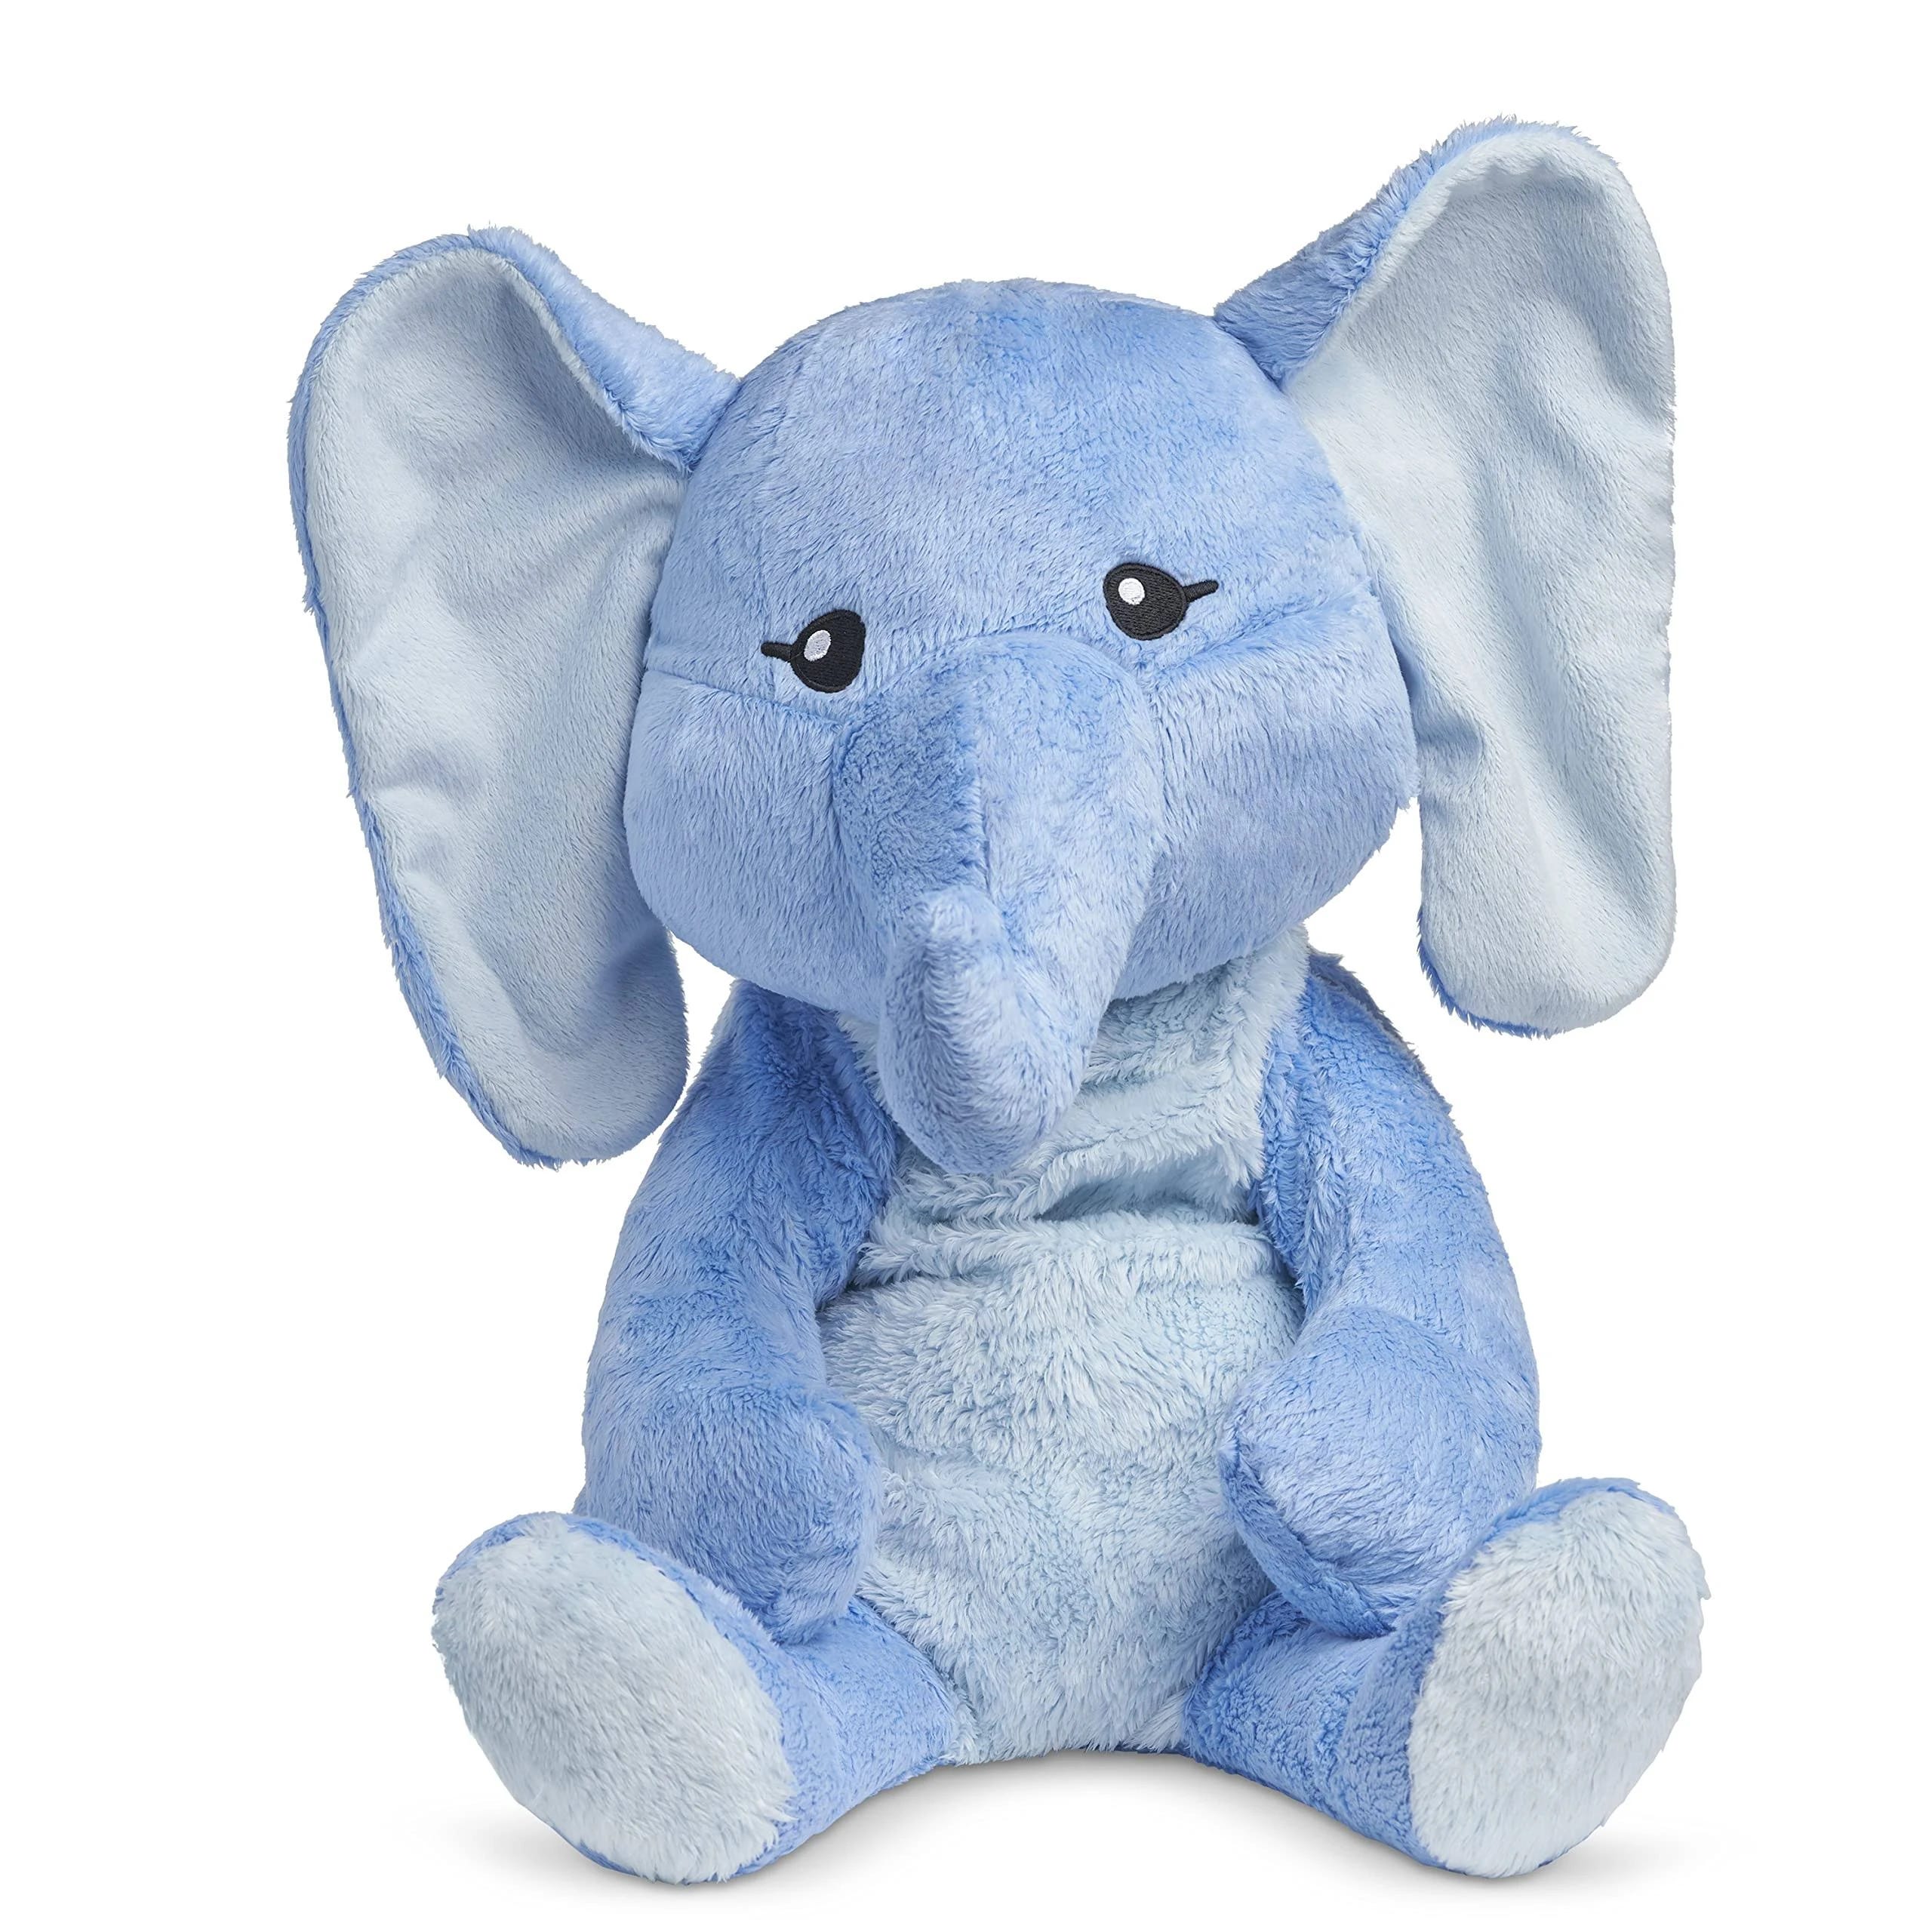 Emory the Elephant: Emotional Support Plush Toy for Stress Relief | Image